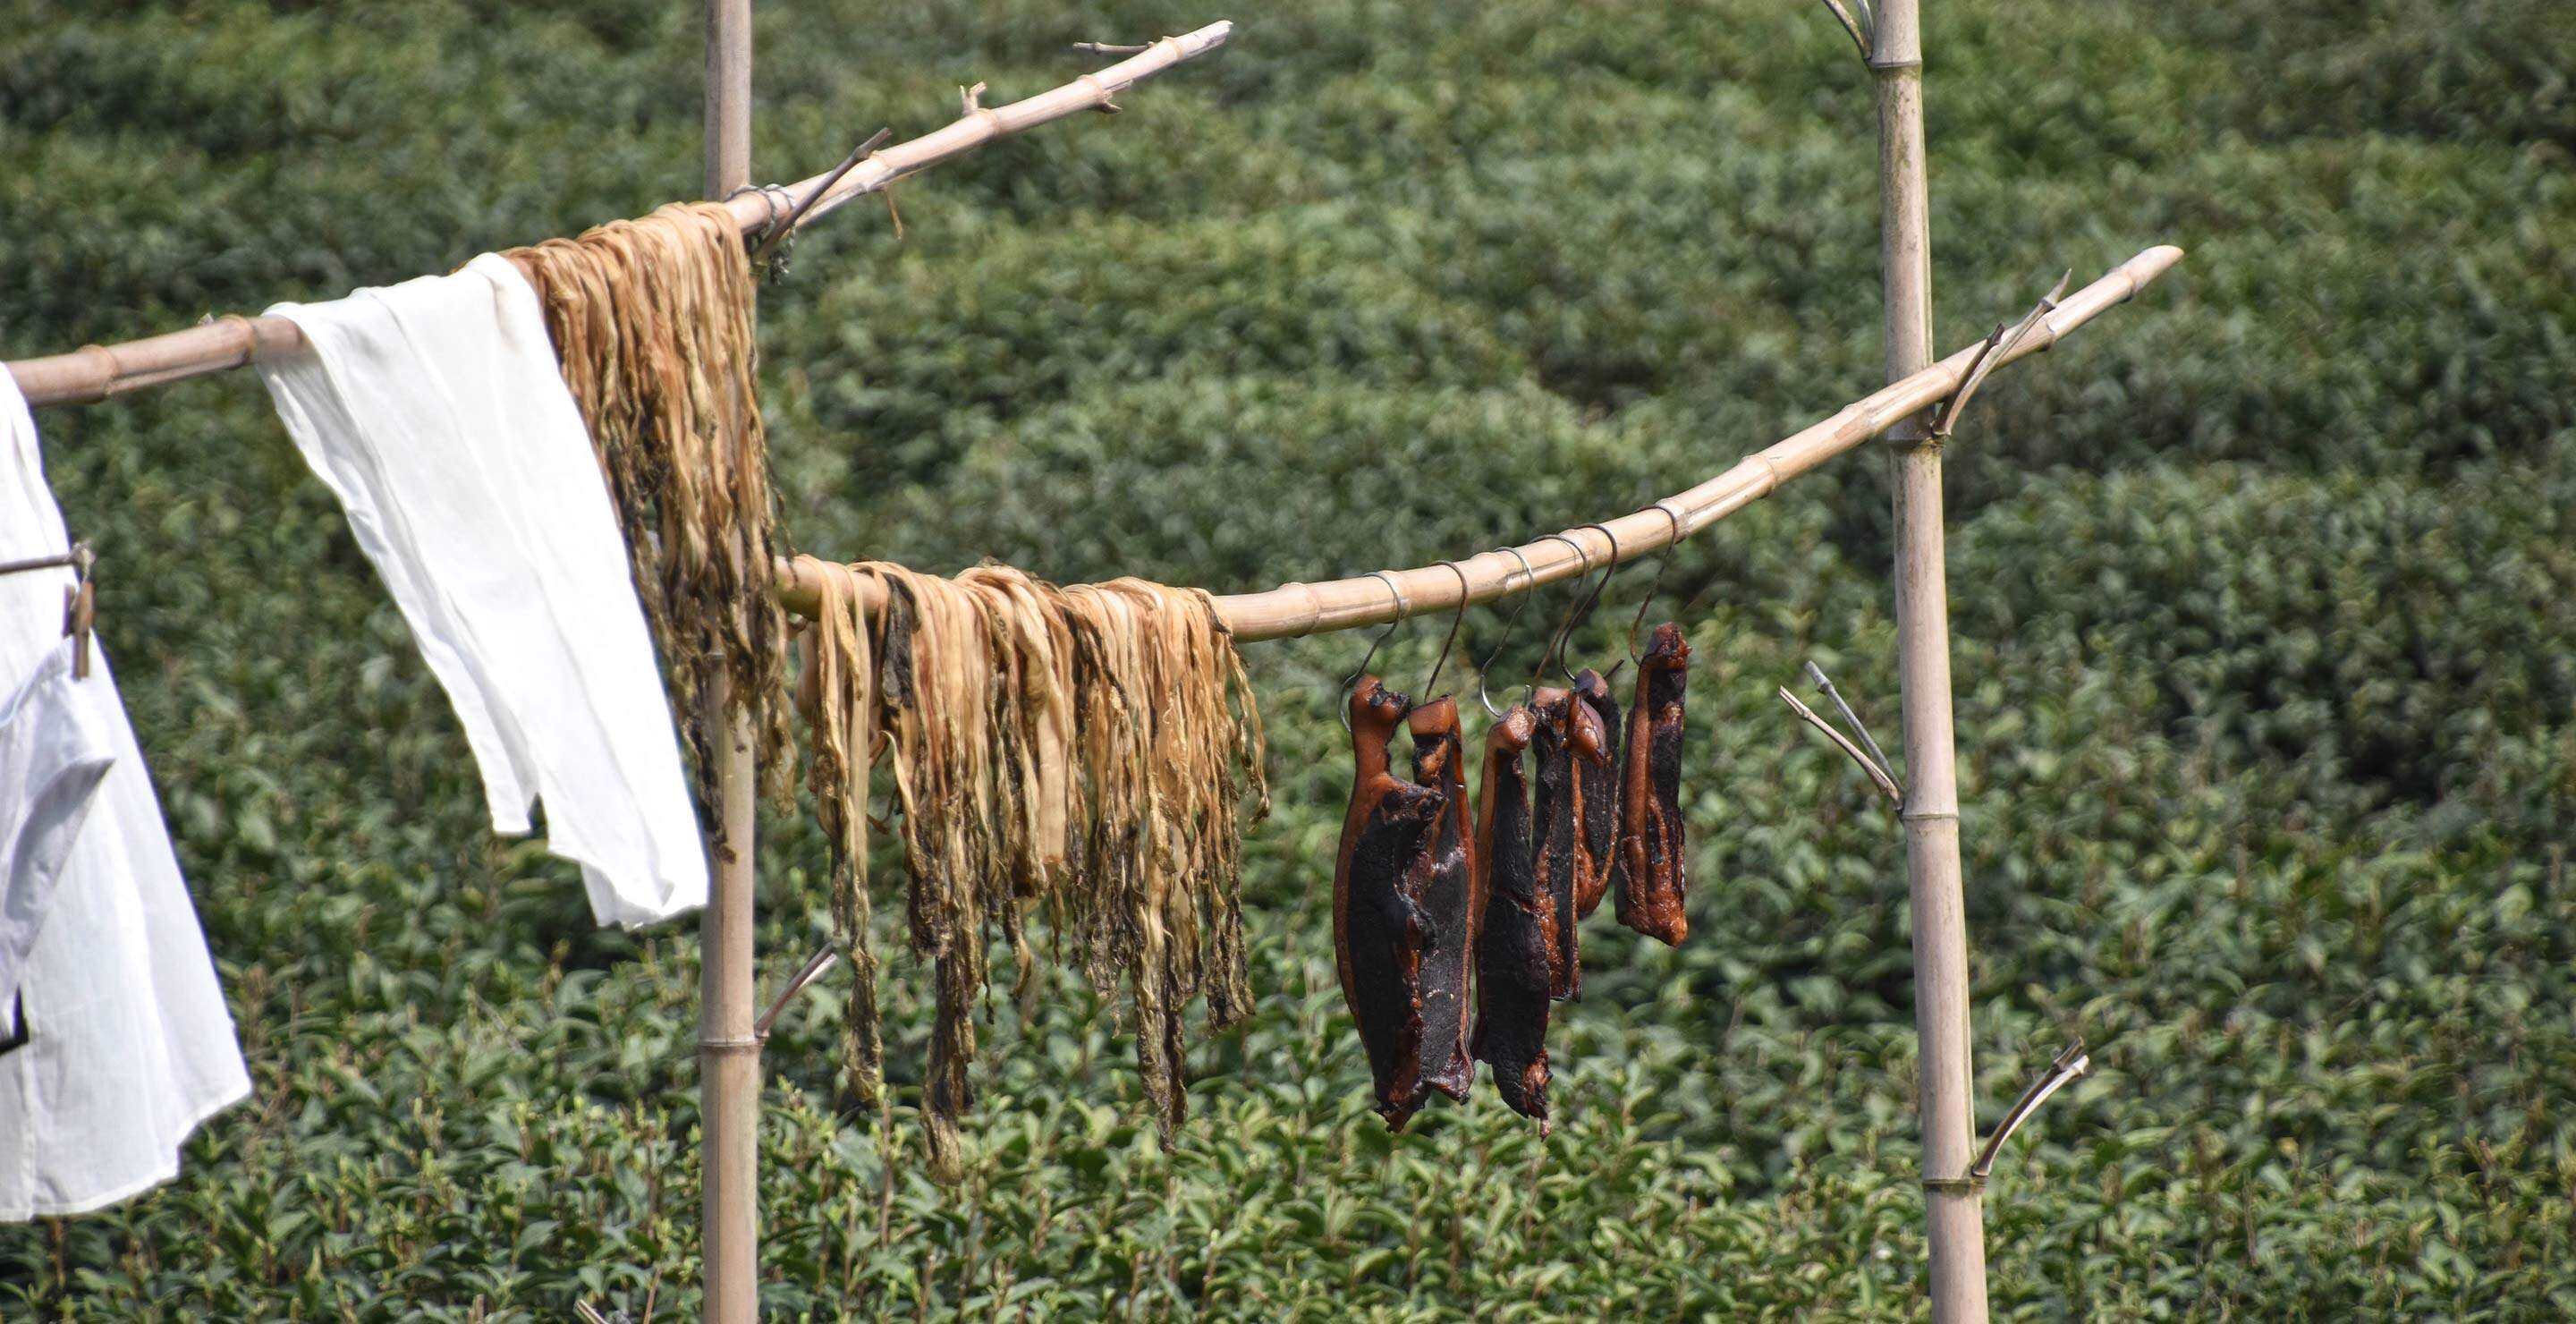 Meat, fish skin, and laundry dry in the middle of a field of West Lake Dragonwell